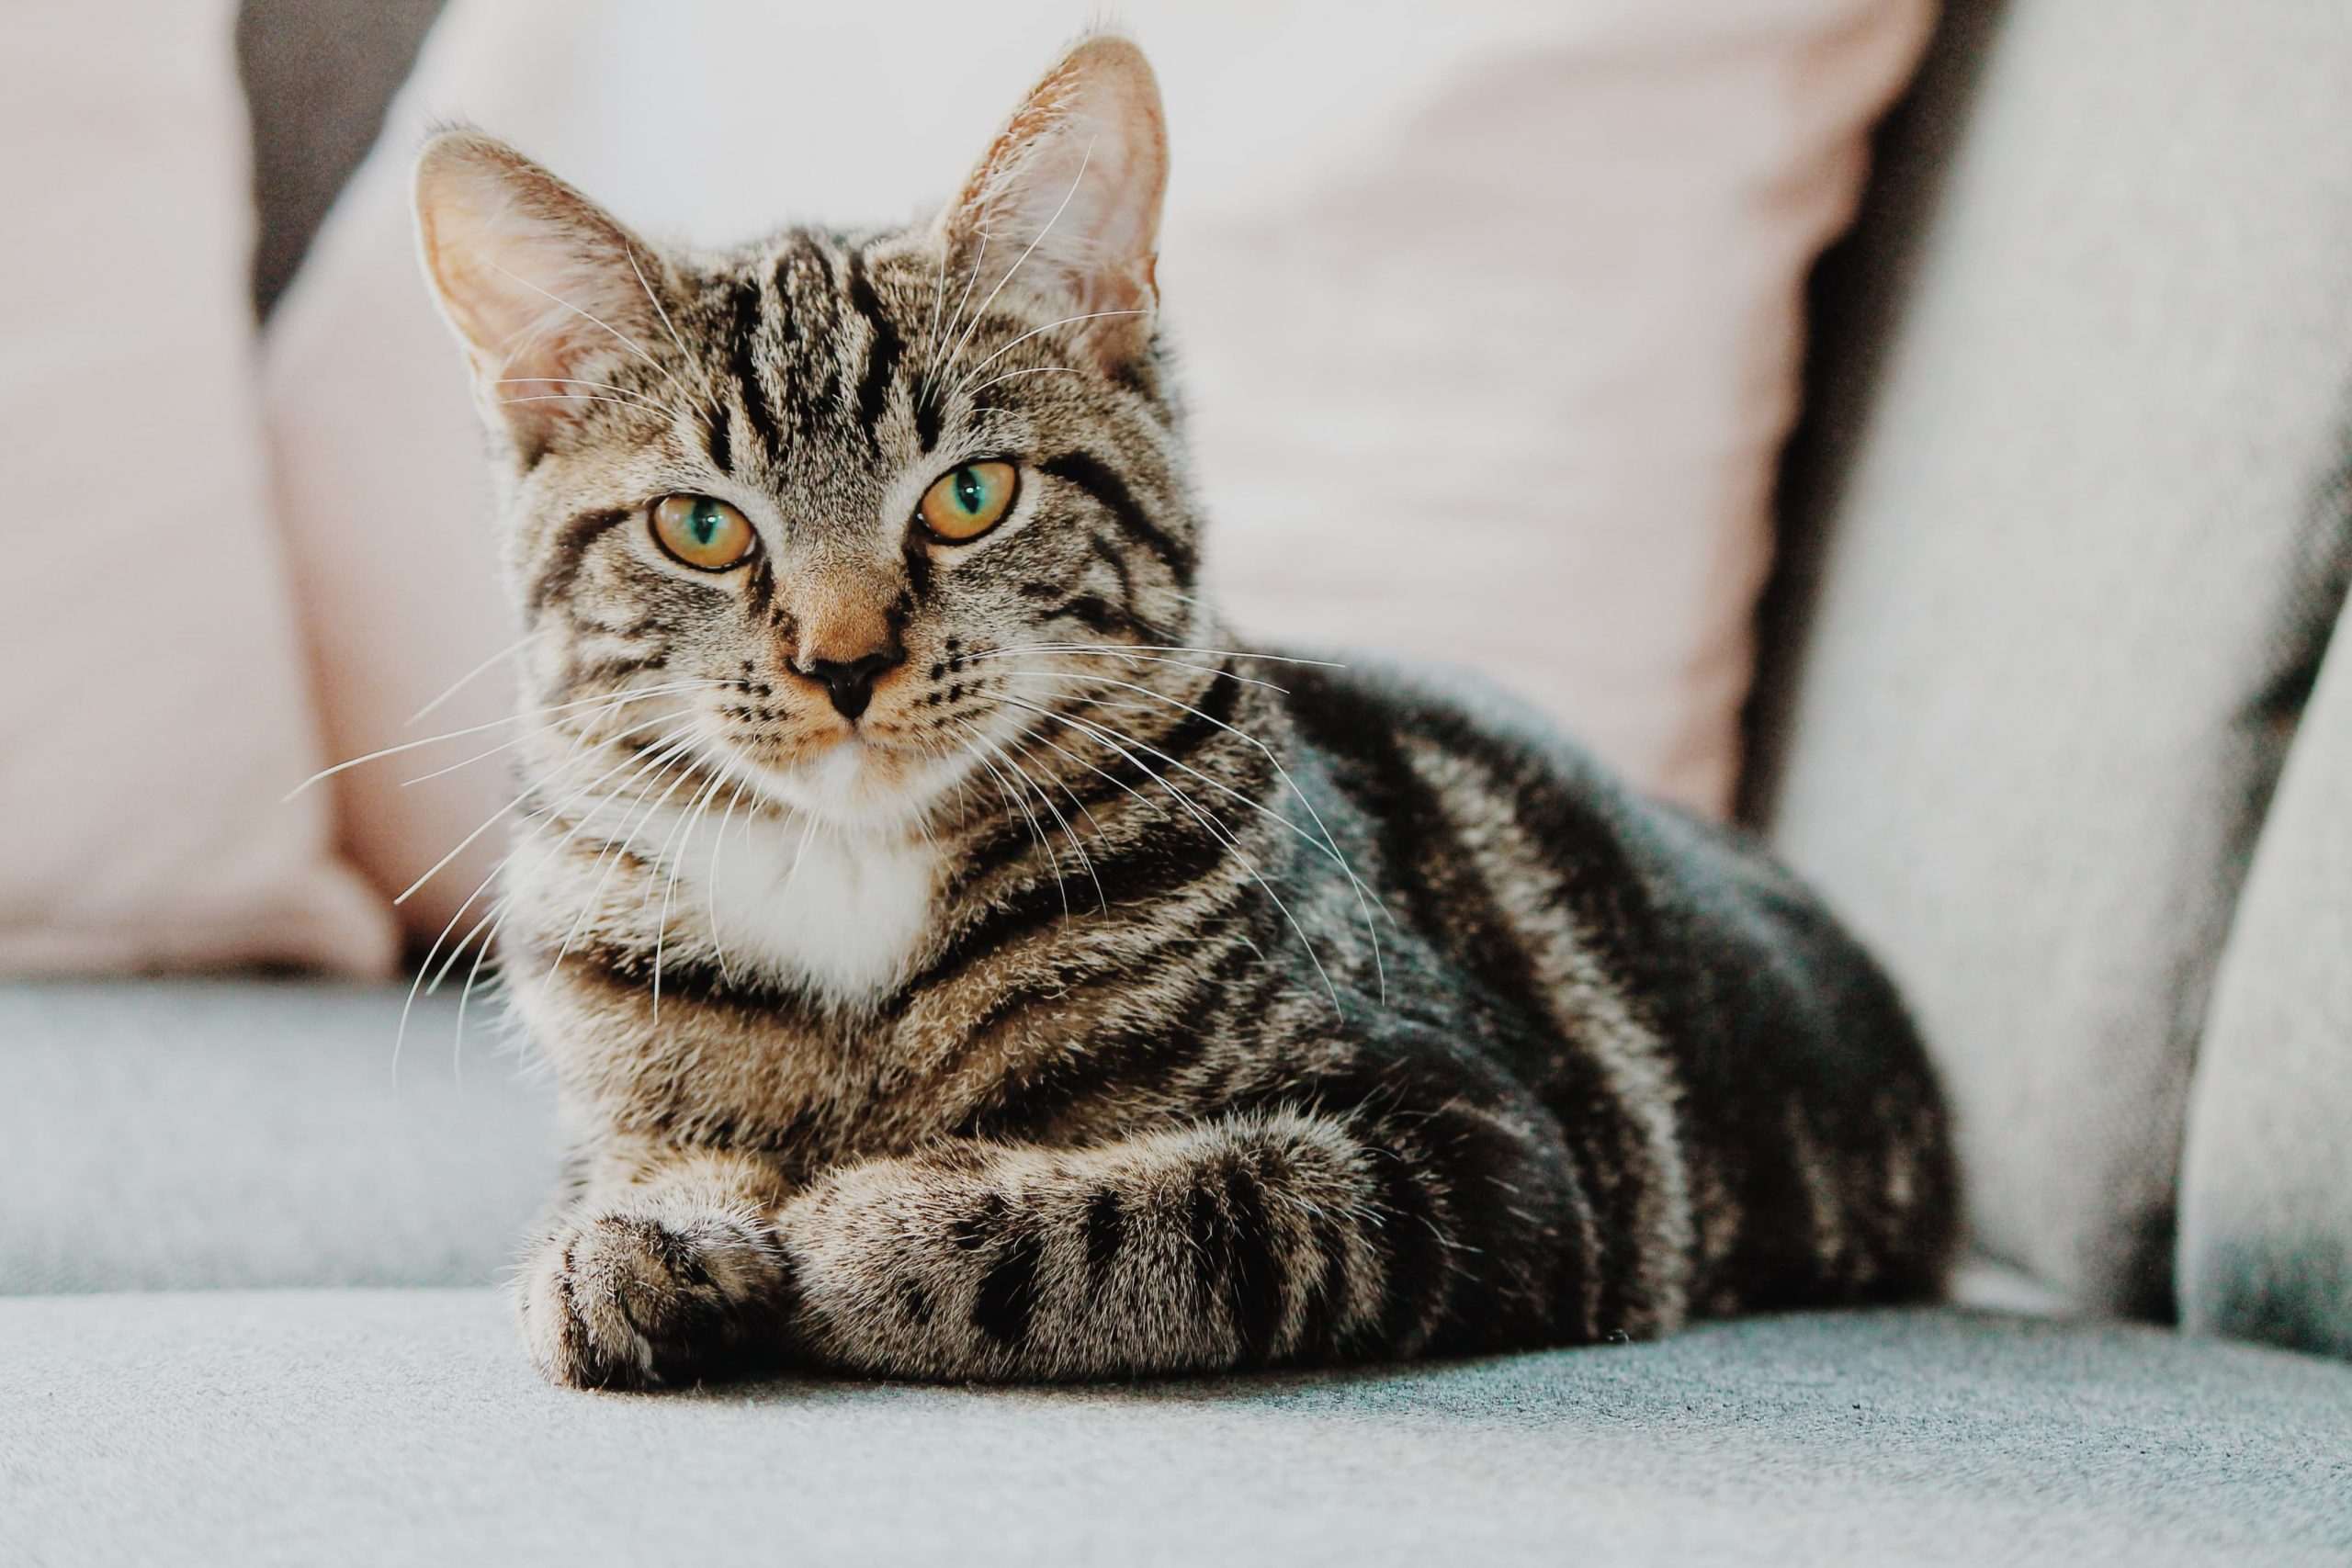 Scientists Identify A Gene That Forms Fur Patterns In Cats